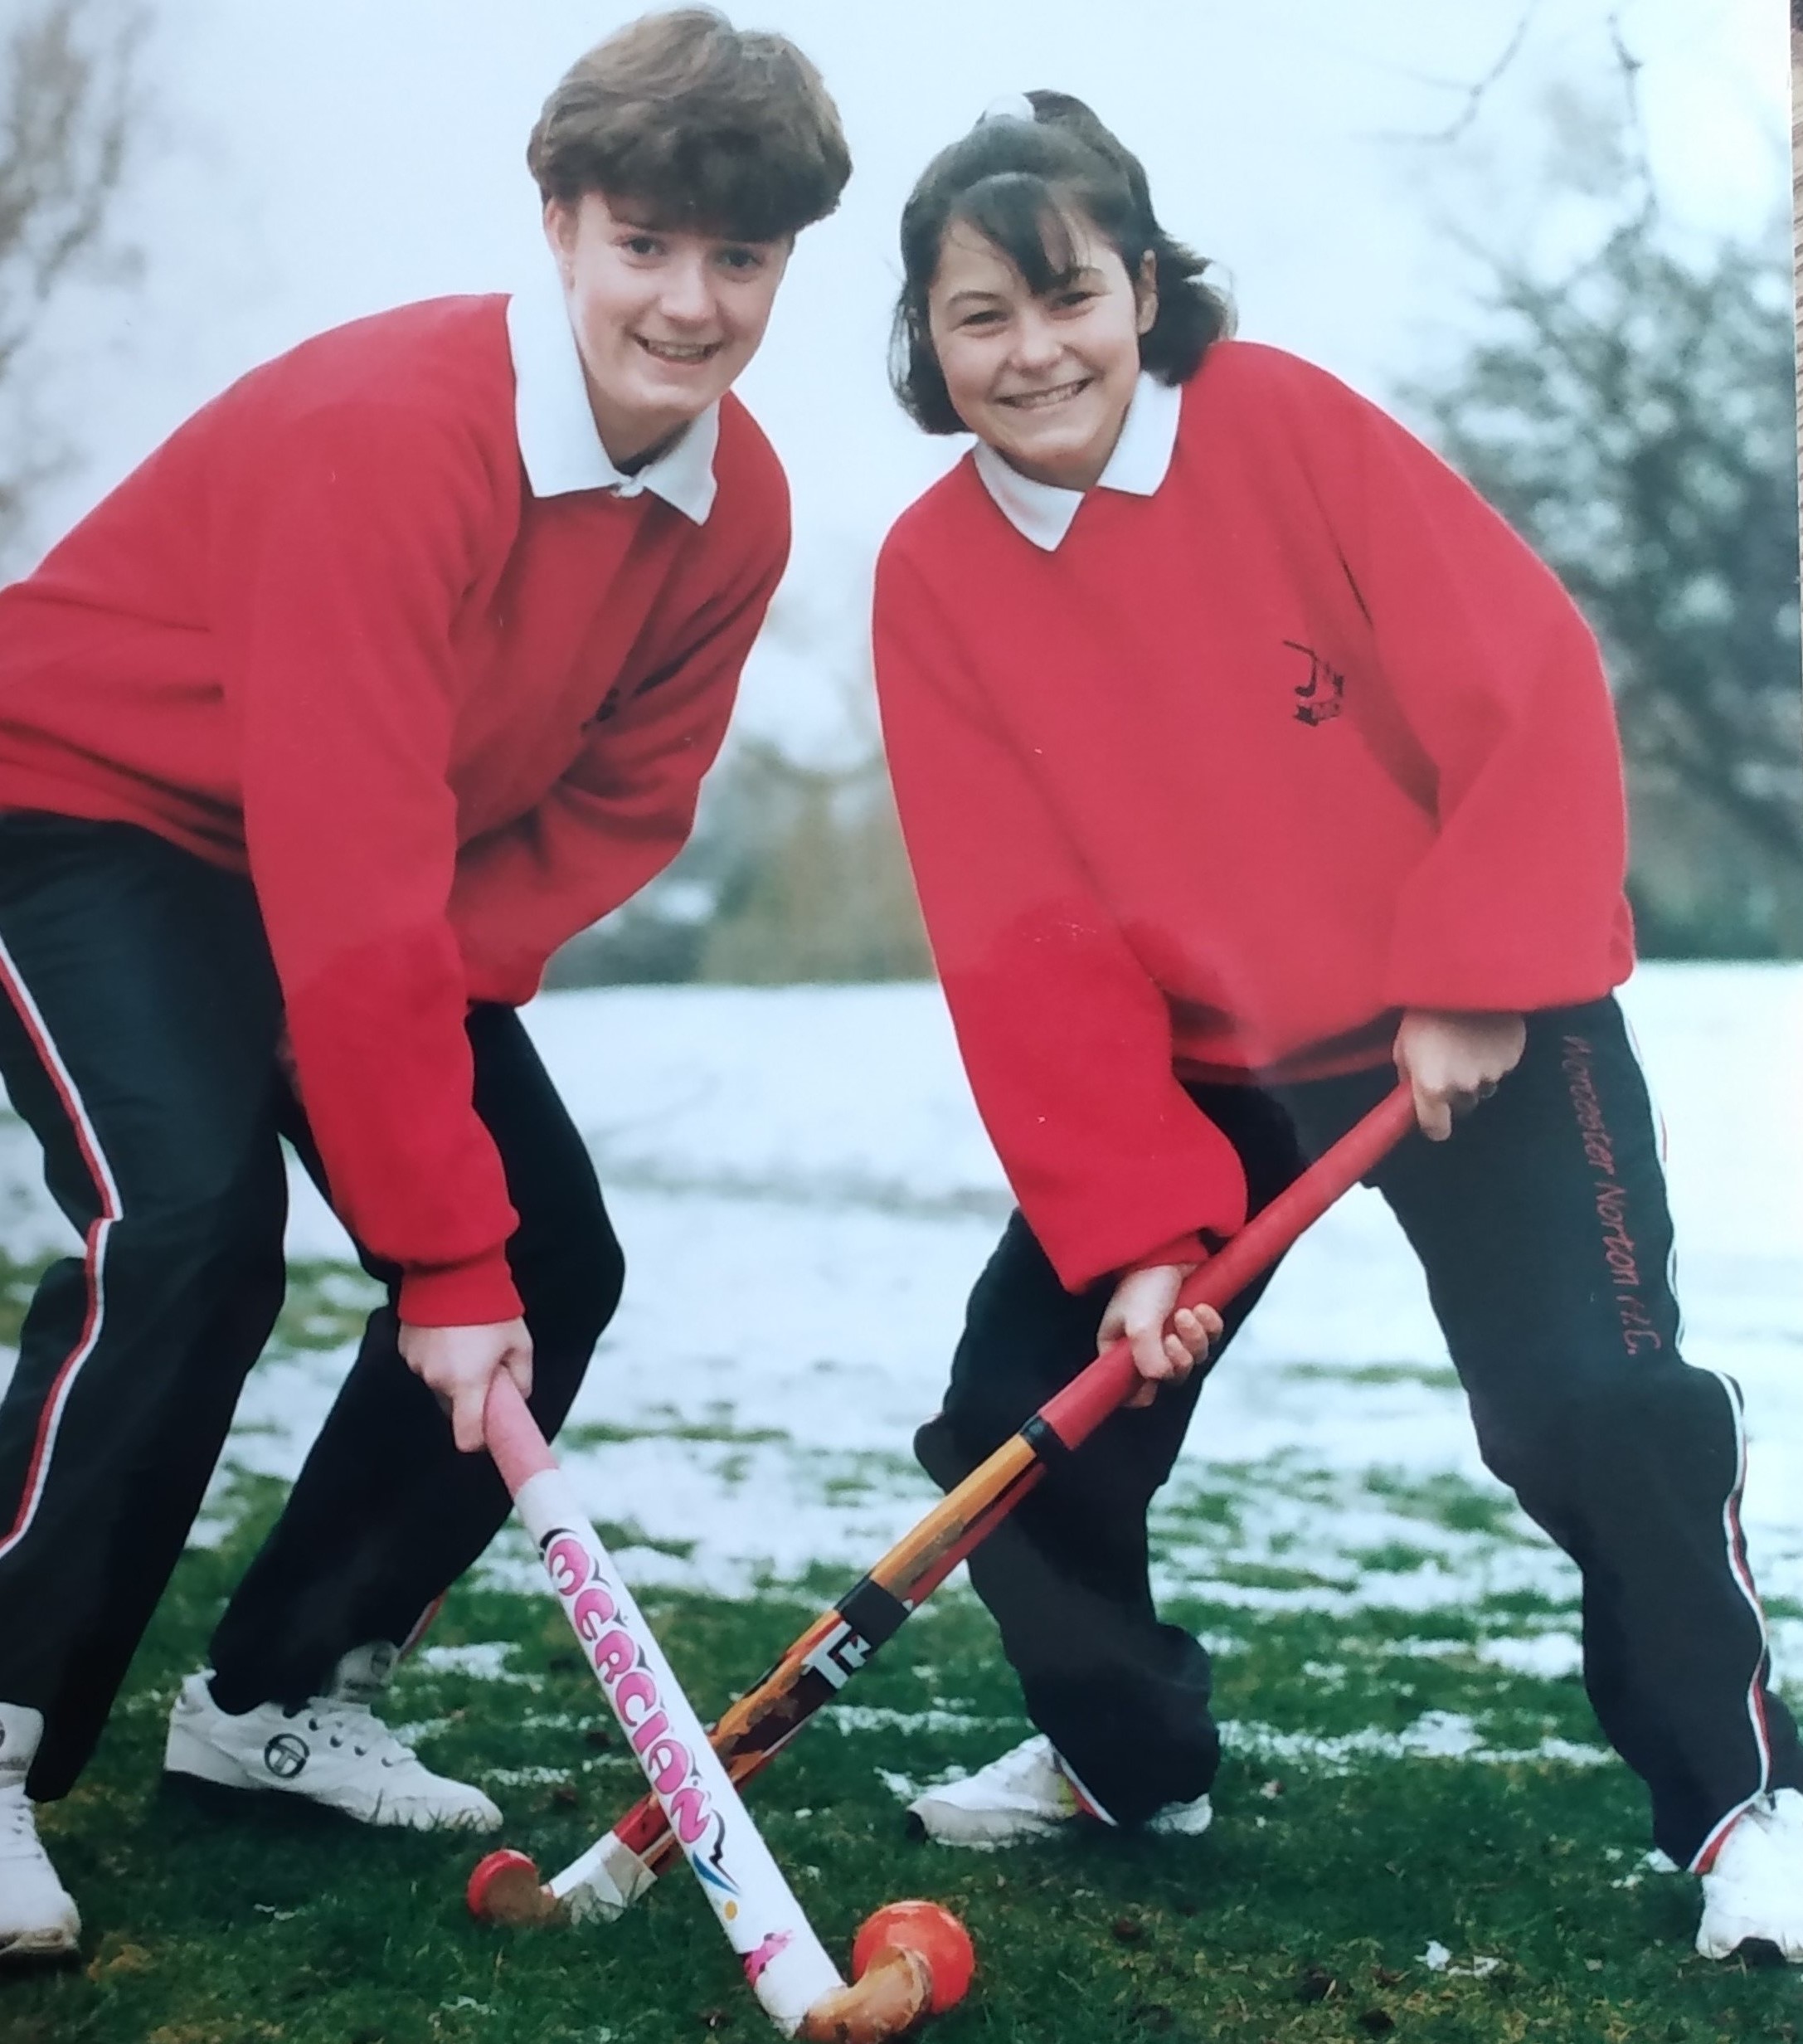 Hockey in all weathers in March 1994 for Natalie Hannah and Kelly Harvey